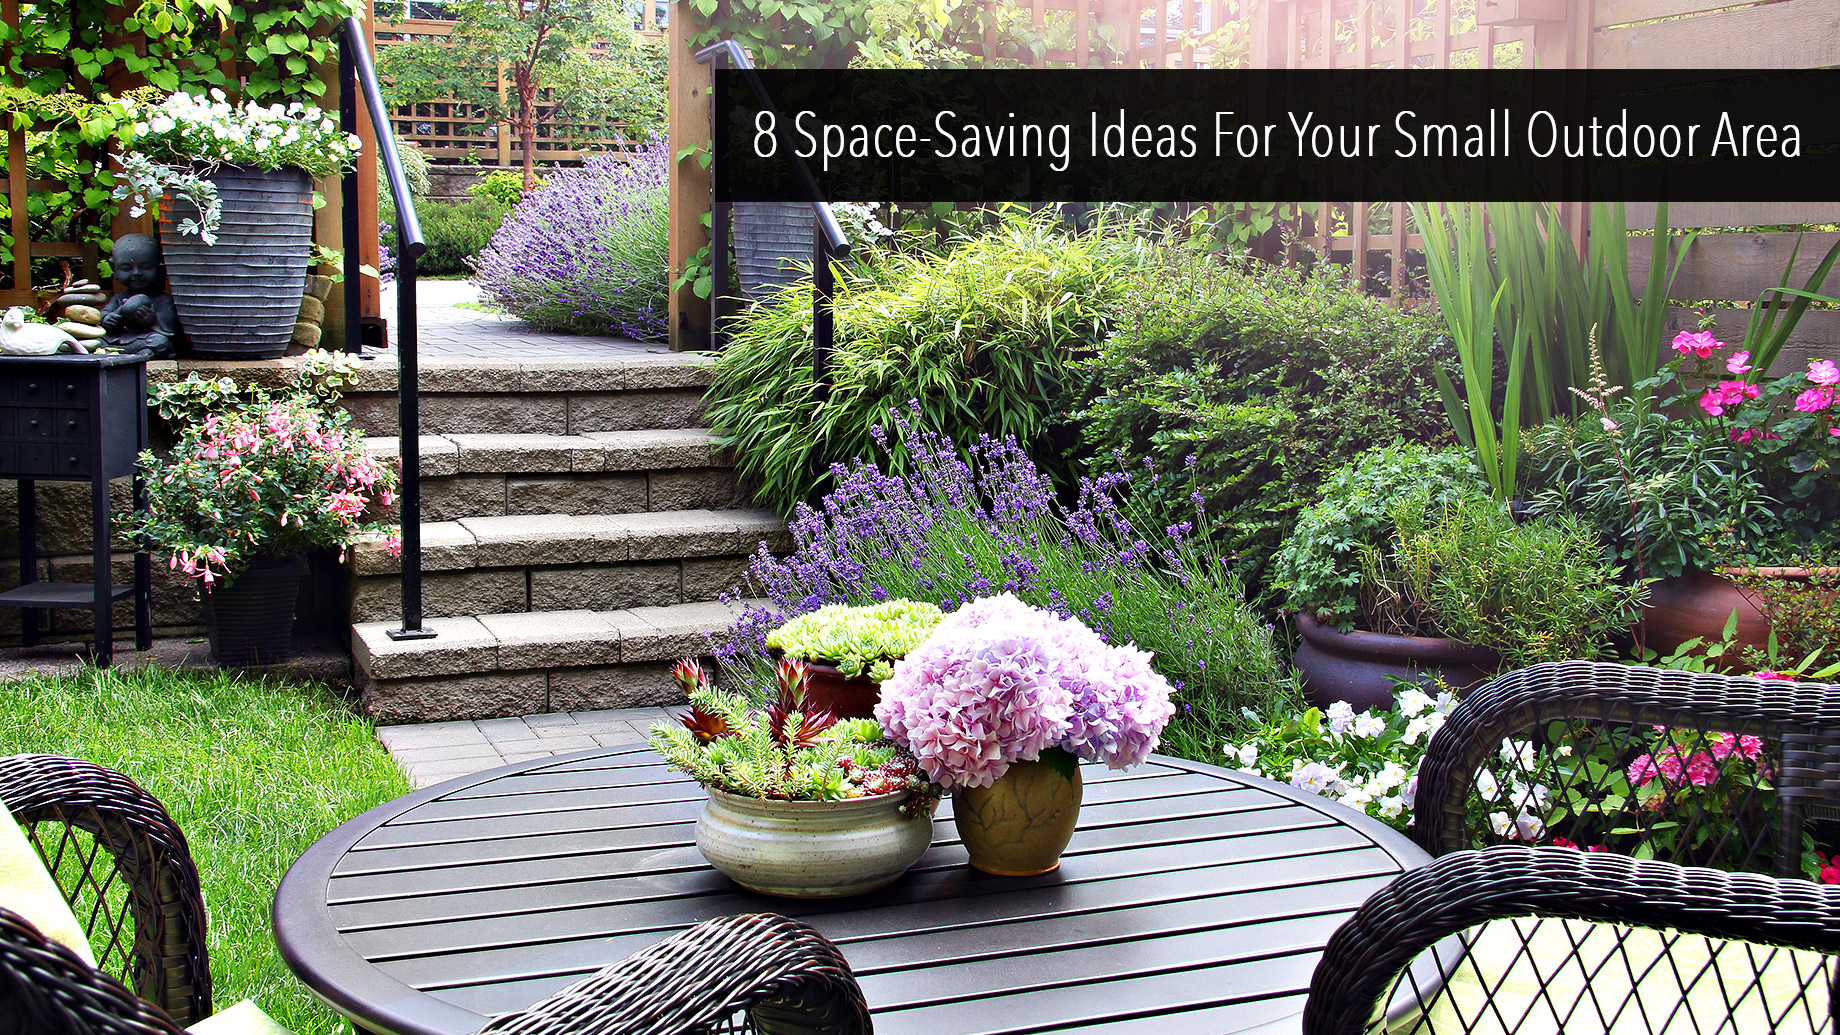 8 Space-Saving Ideas For Your Small Outdoor Area